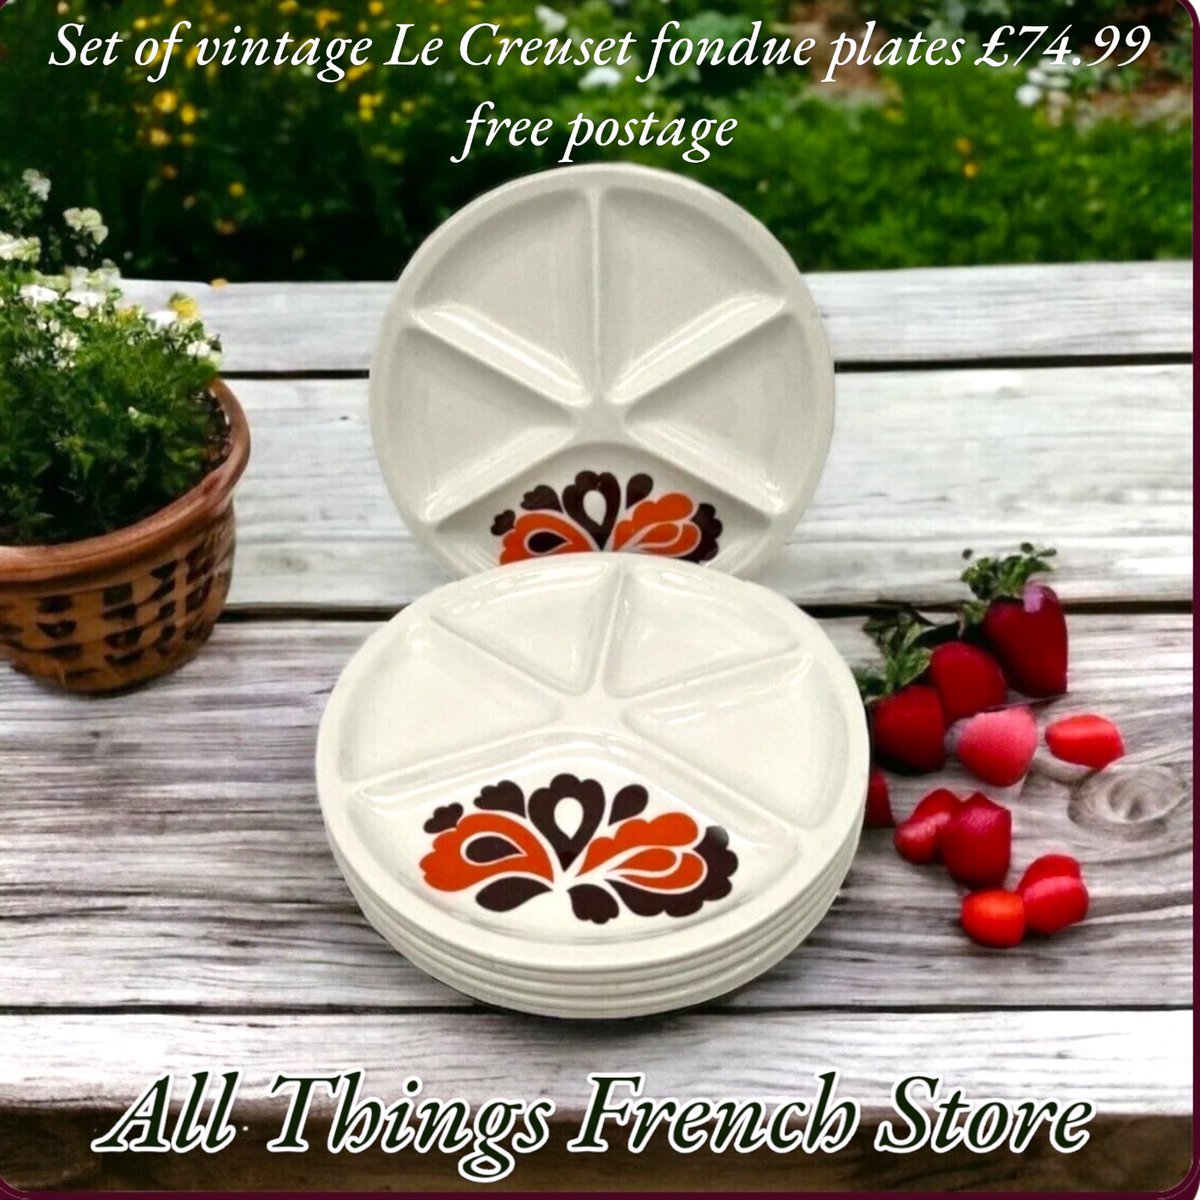 allthingsfrenchstore.com/products/le-cr… #vintageshowandsell #lecreuset #buyvintage